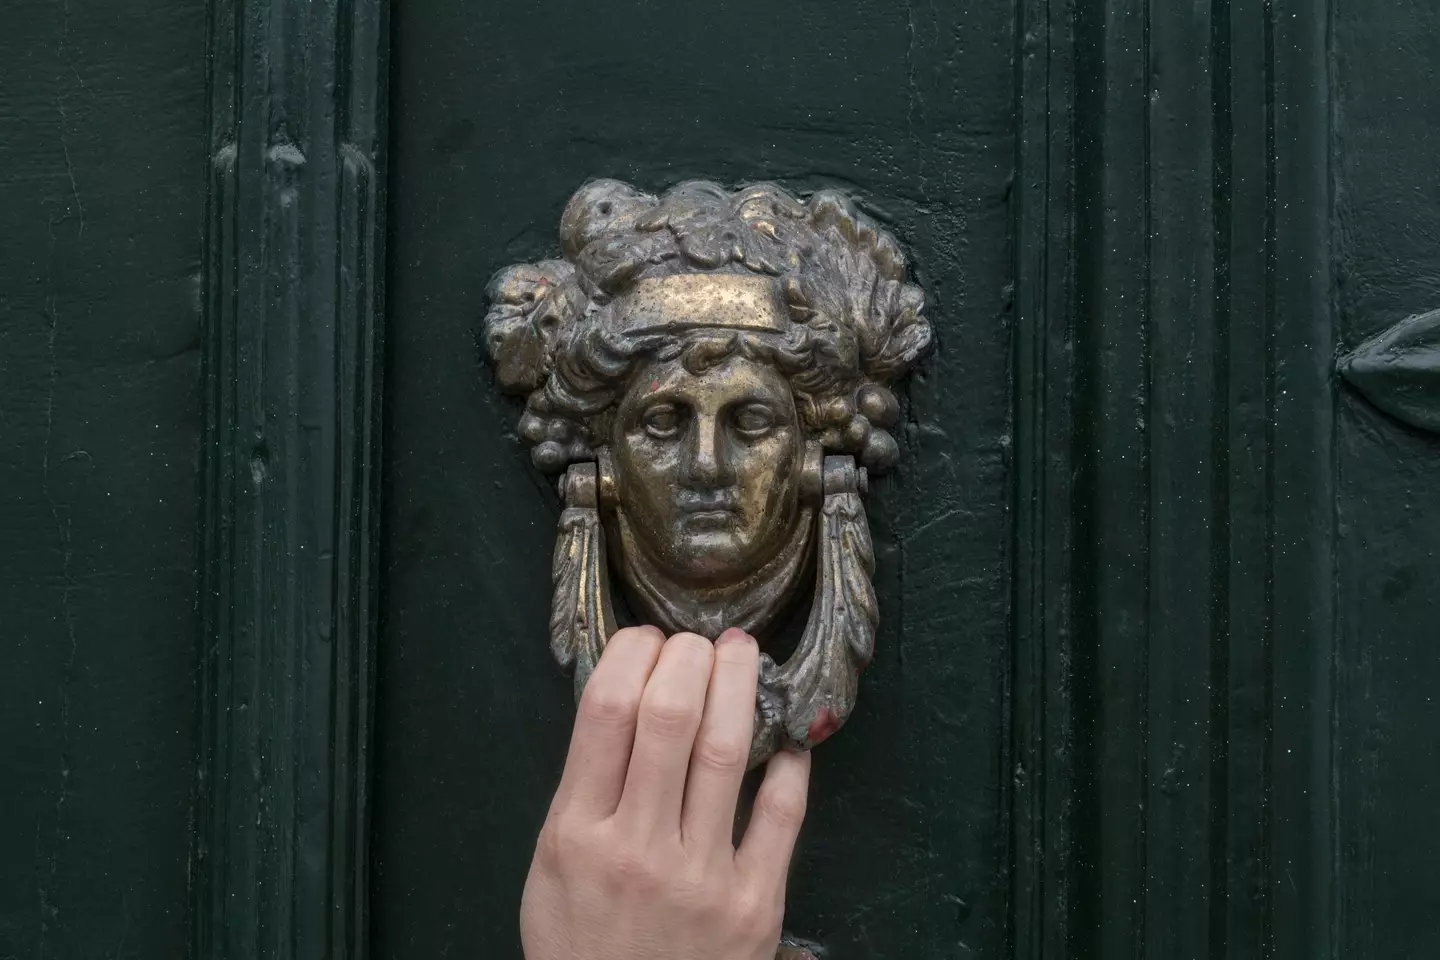 Maybe it would be called cling clang run if the door had a knocker like this?